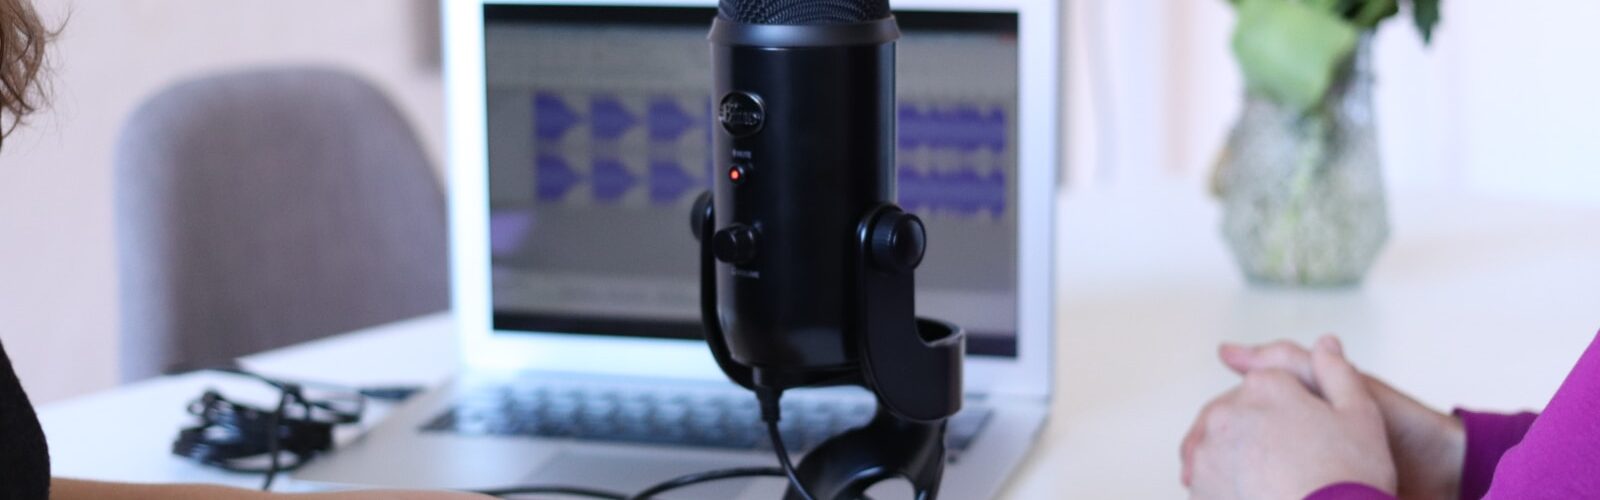 How to Find Podcasting Tools and Get Inspiration for Your Podcasts